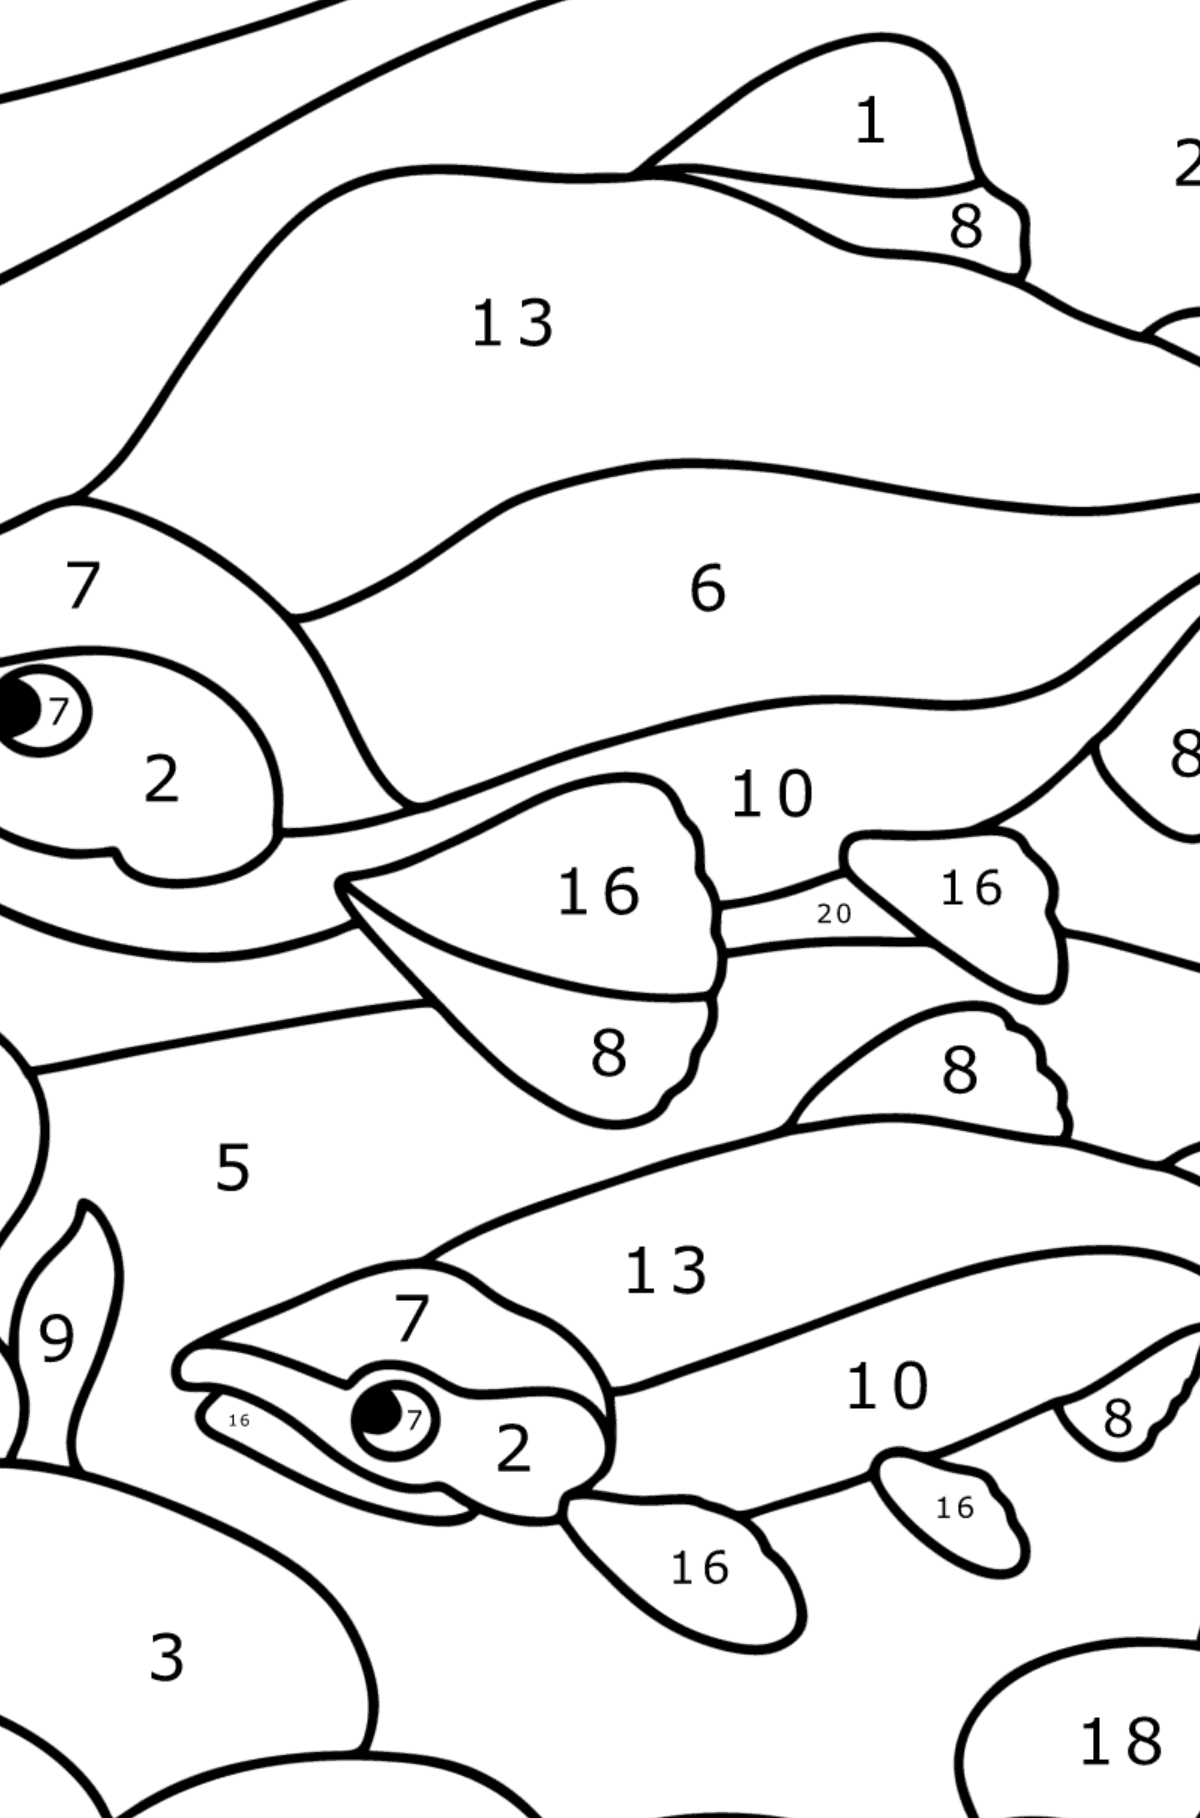 Red salmon coloring page - Coloring by Numbers for Kids